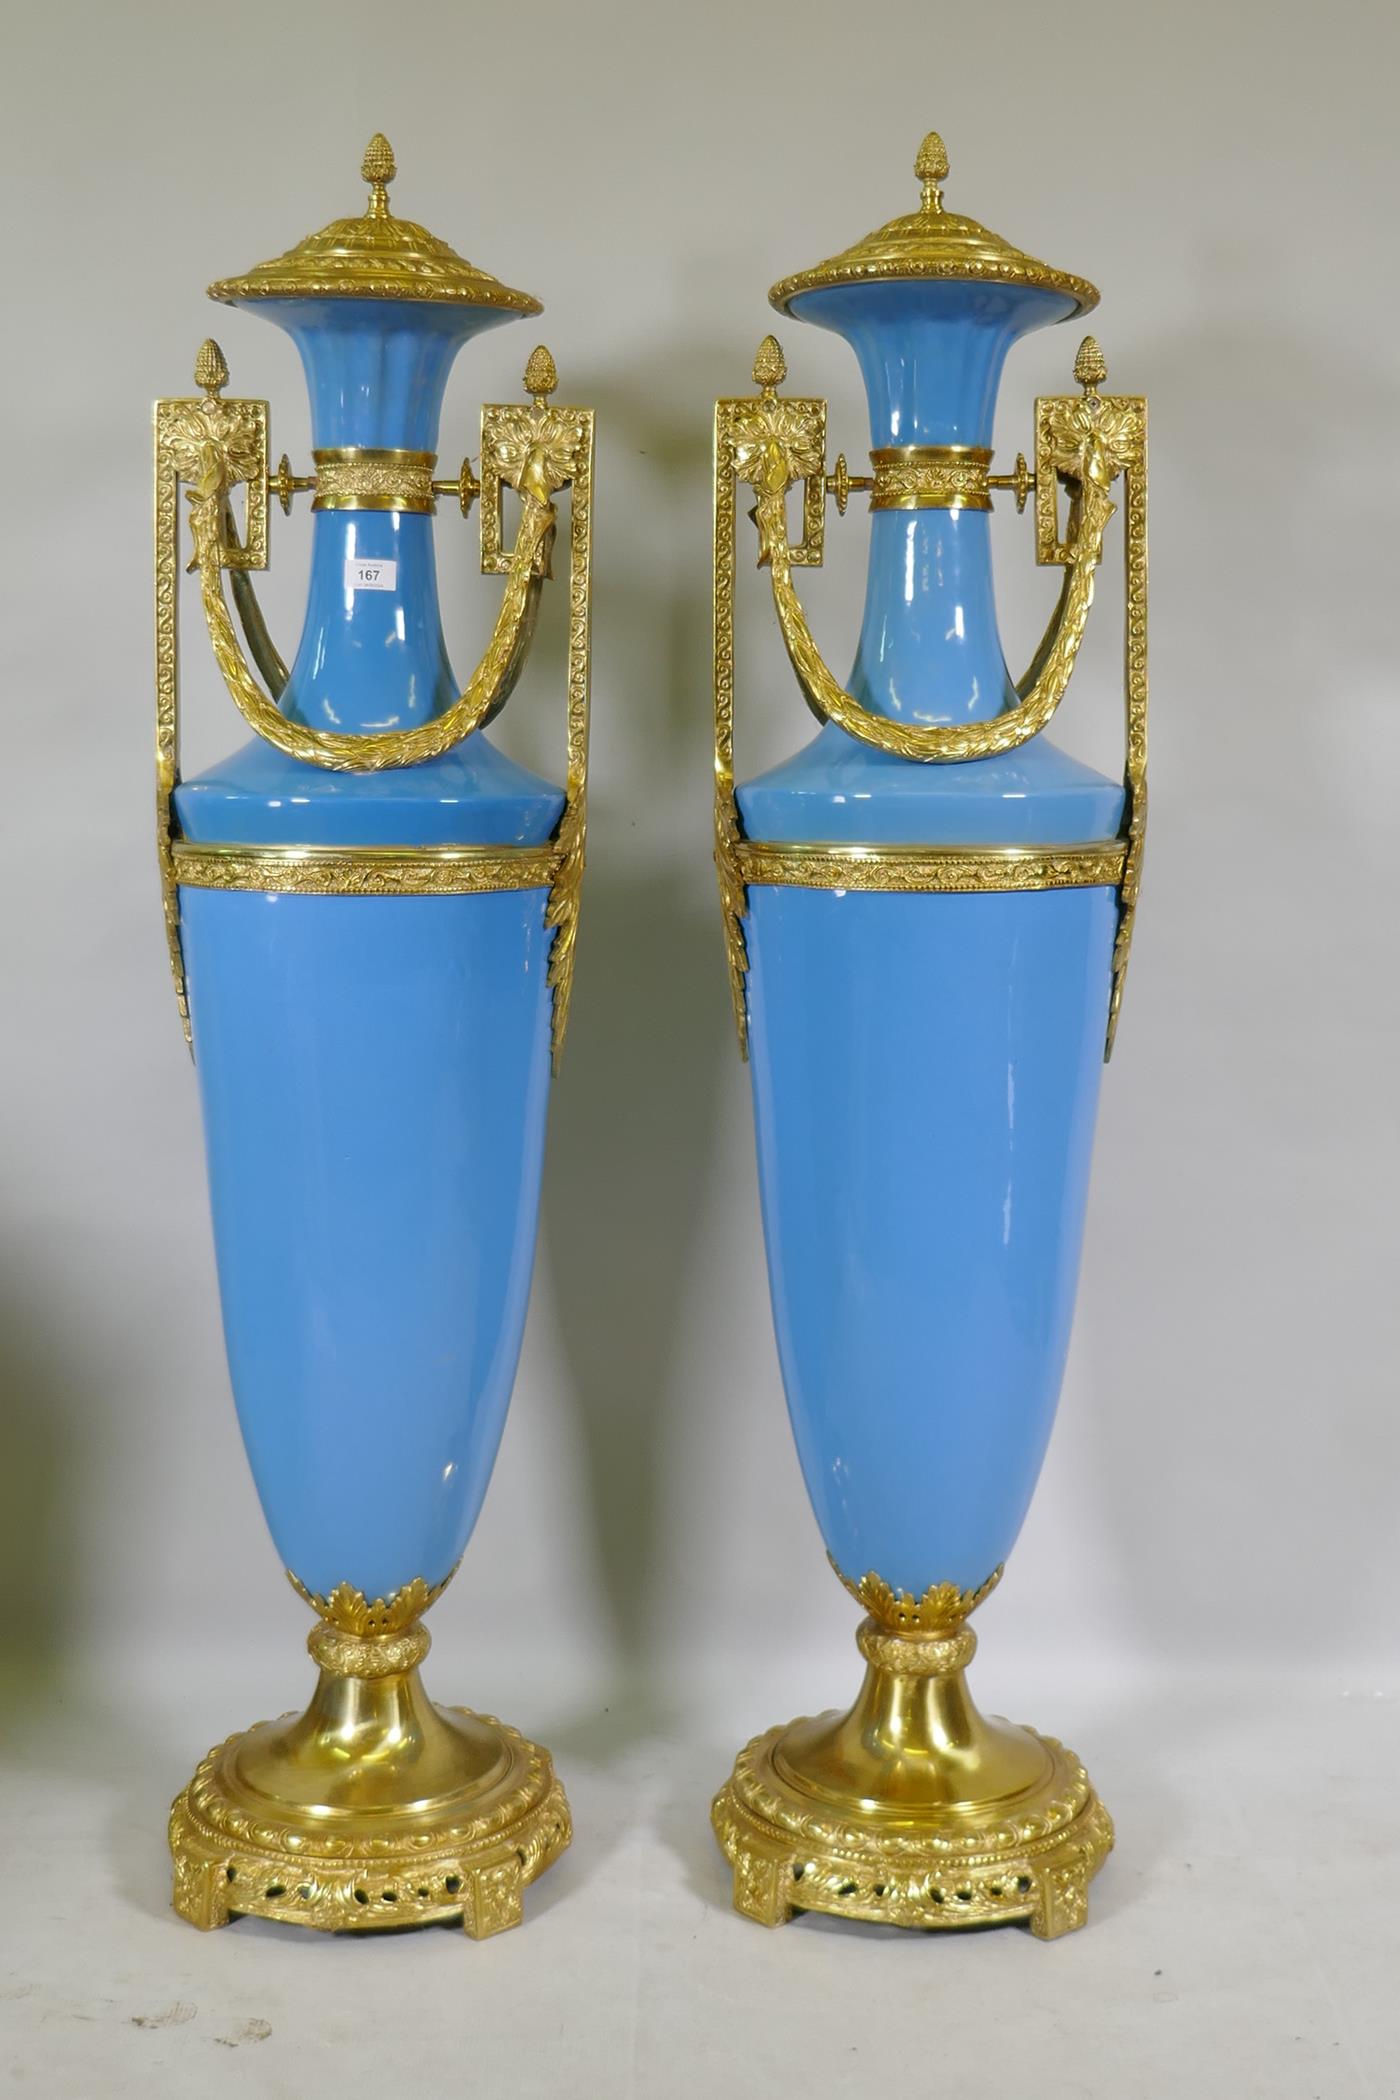 A large pair of Sevres blue style ceramic urns with ormolu mounts, 135cm high - Image 3 of 4